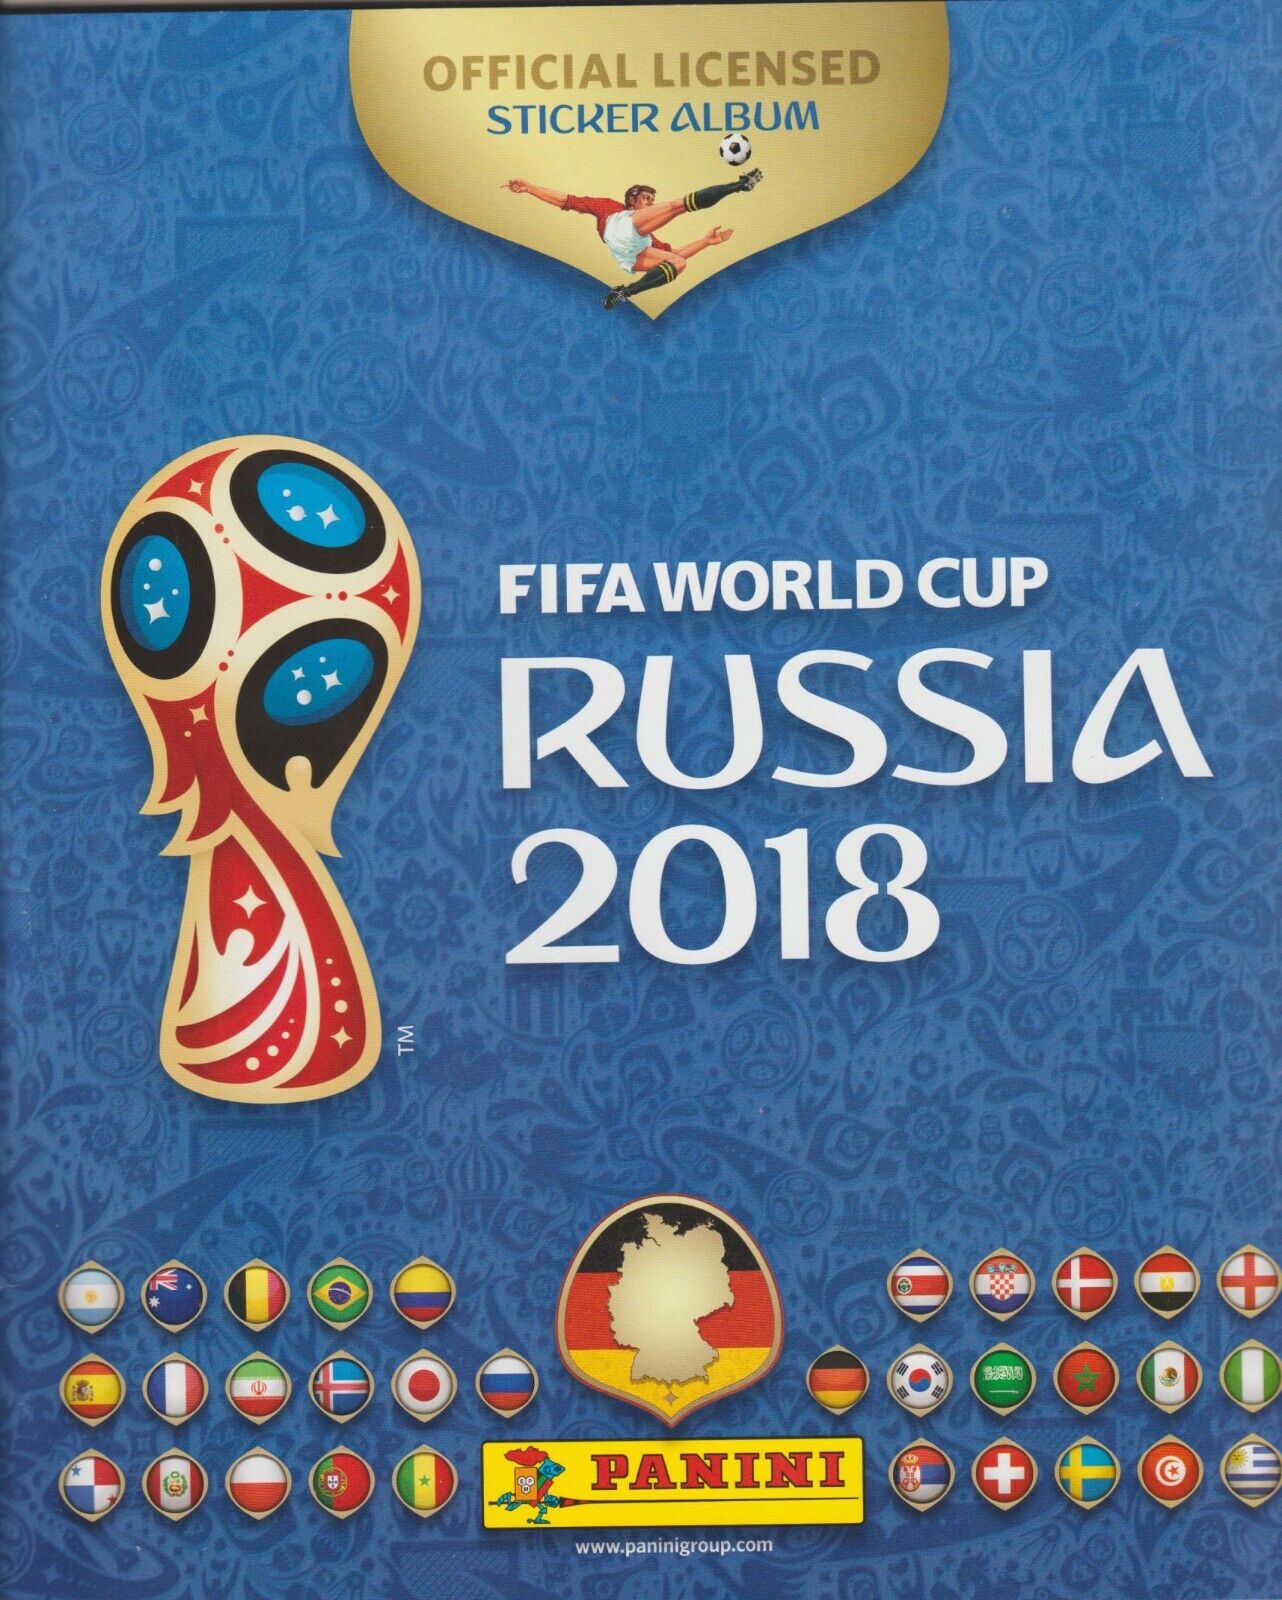 PANINI World Cup 2018 Russia Russia 50 stickers choose from many